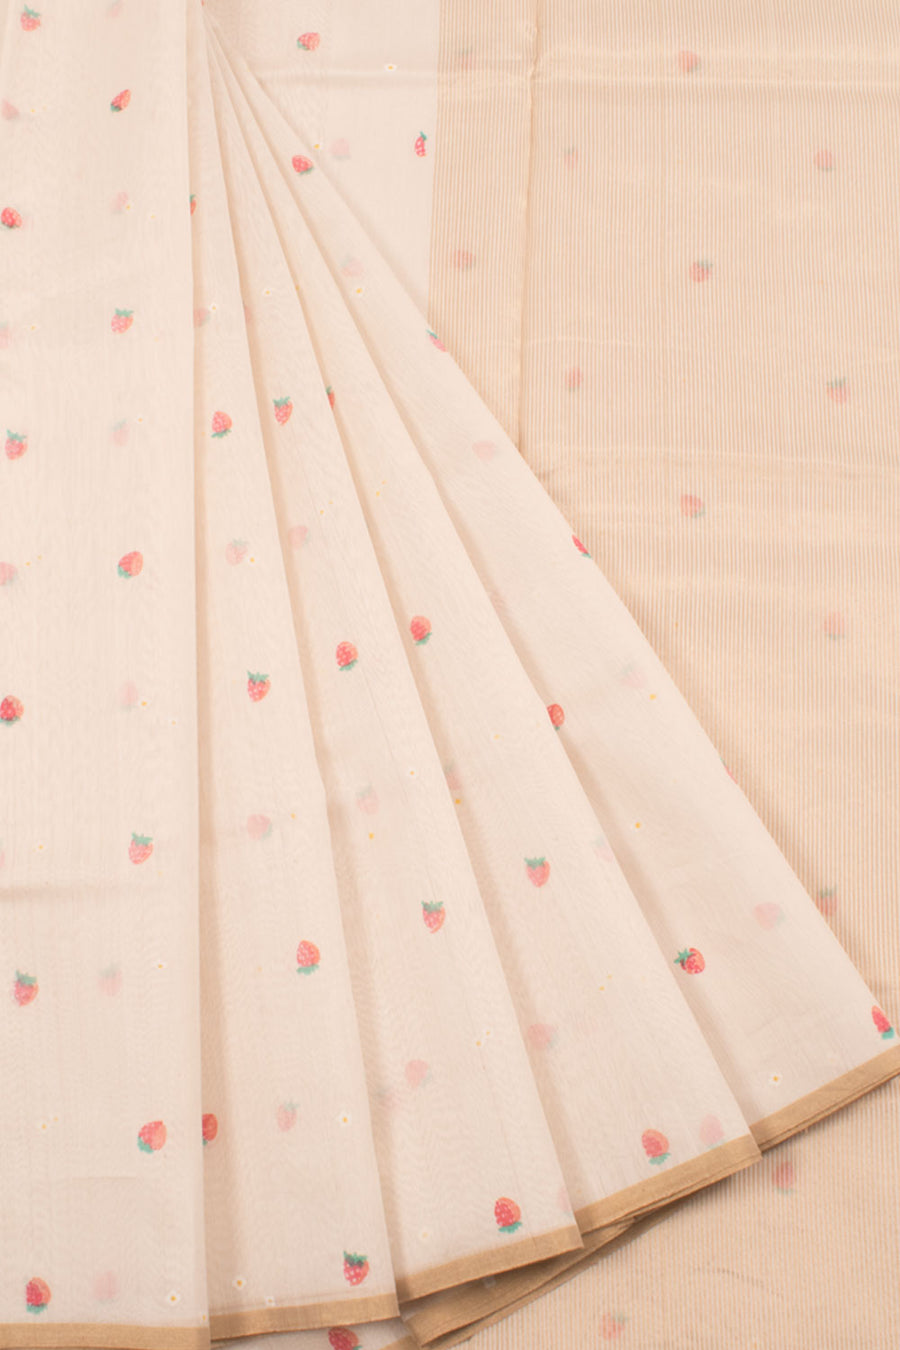 Handwoven Chanderi Silk Cotton Saree with Strawberry and Floral Motifs